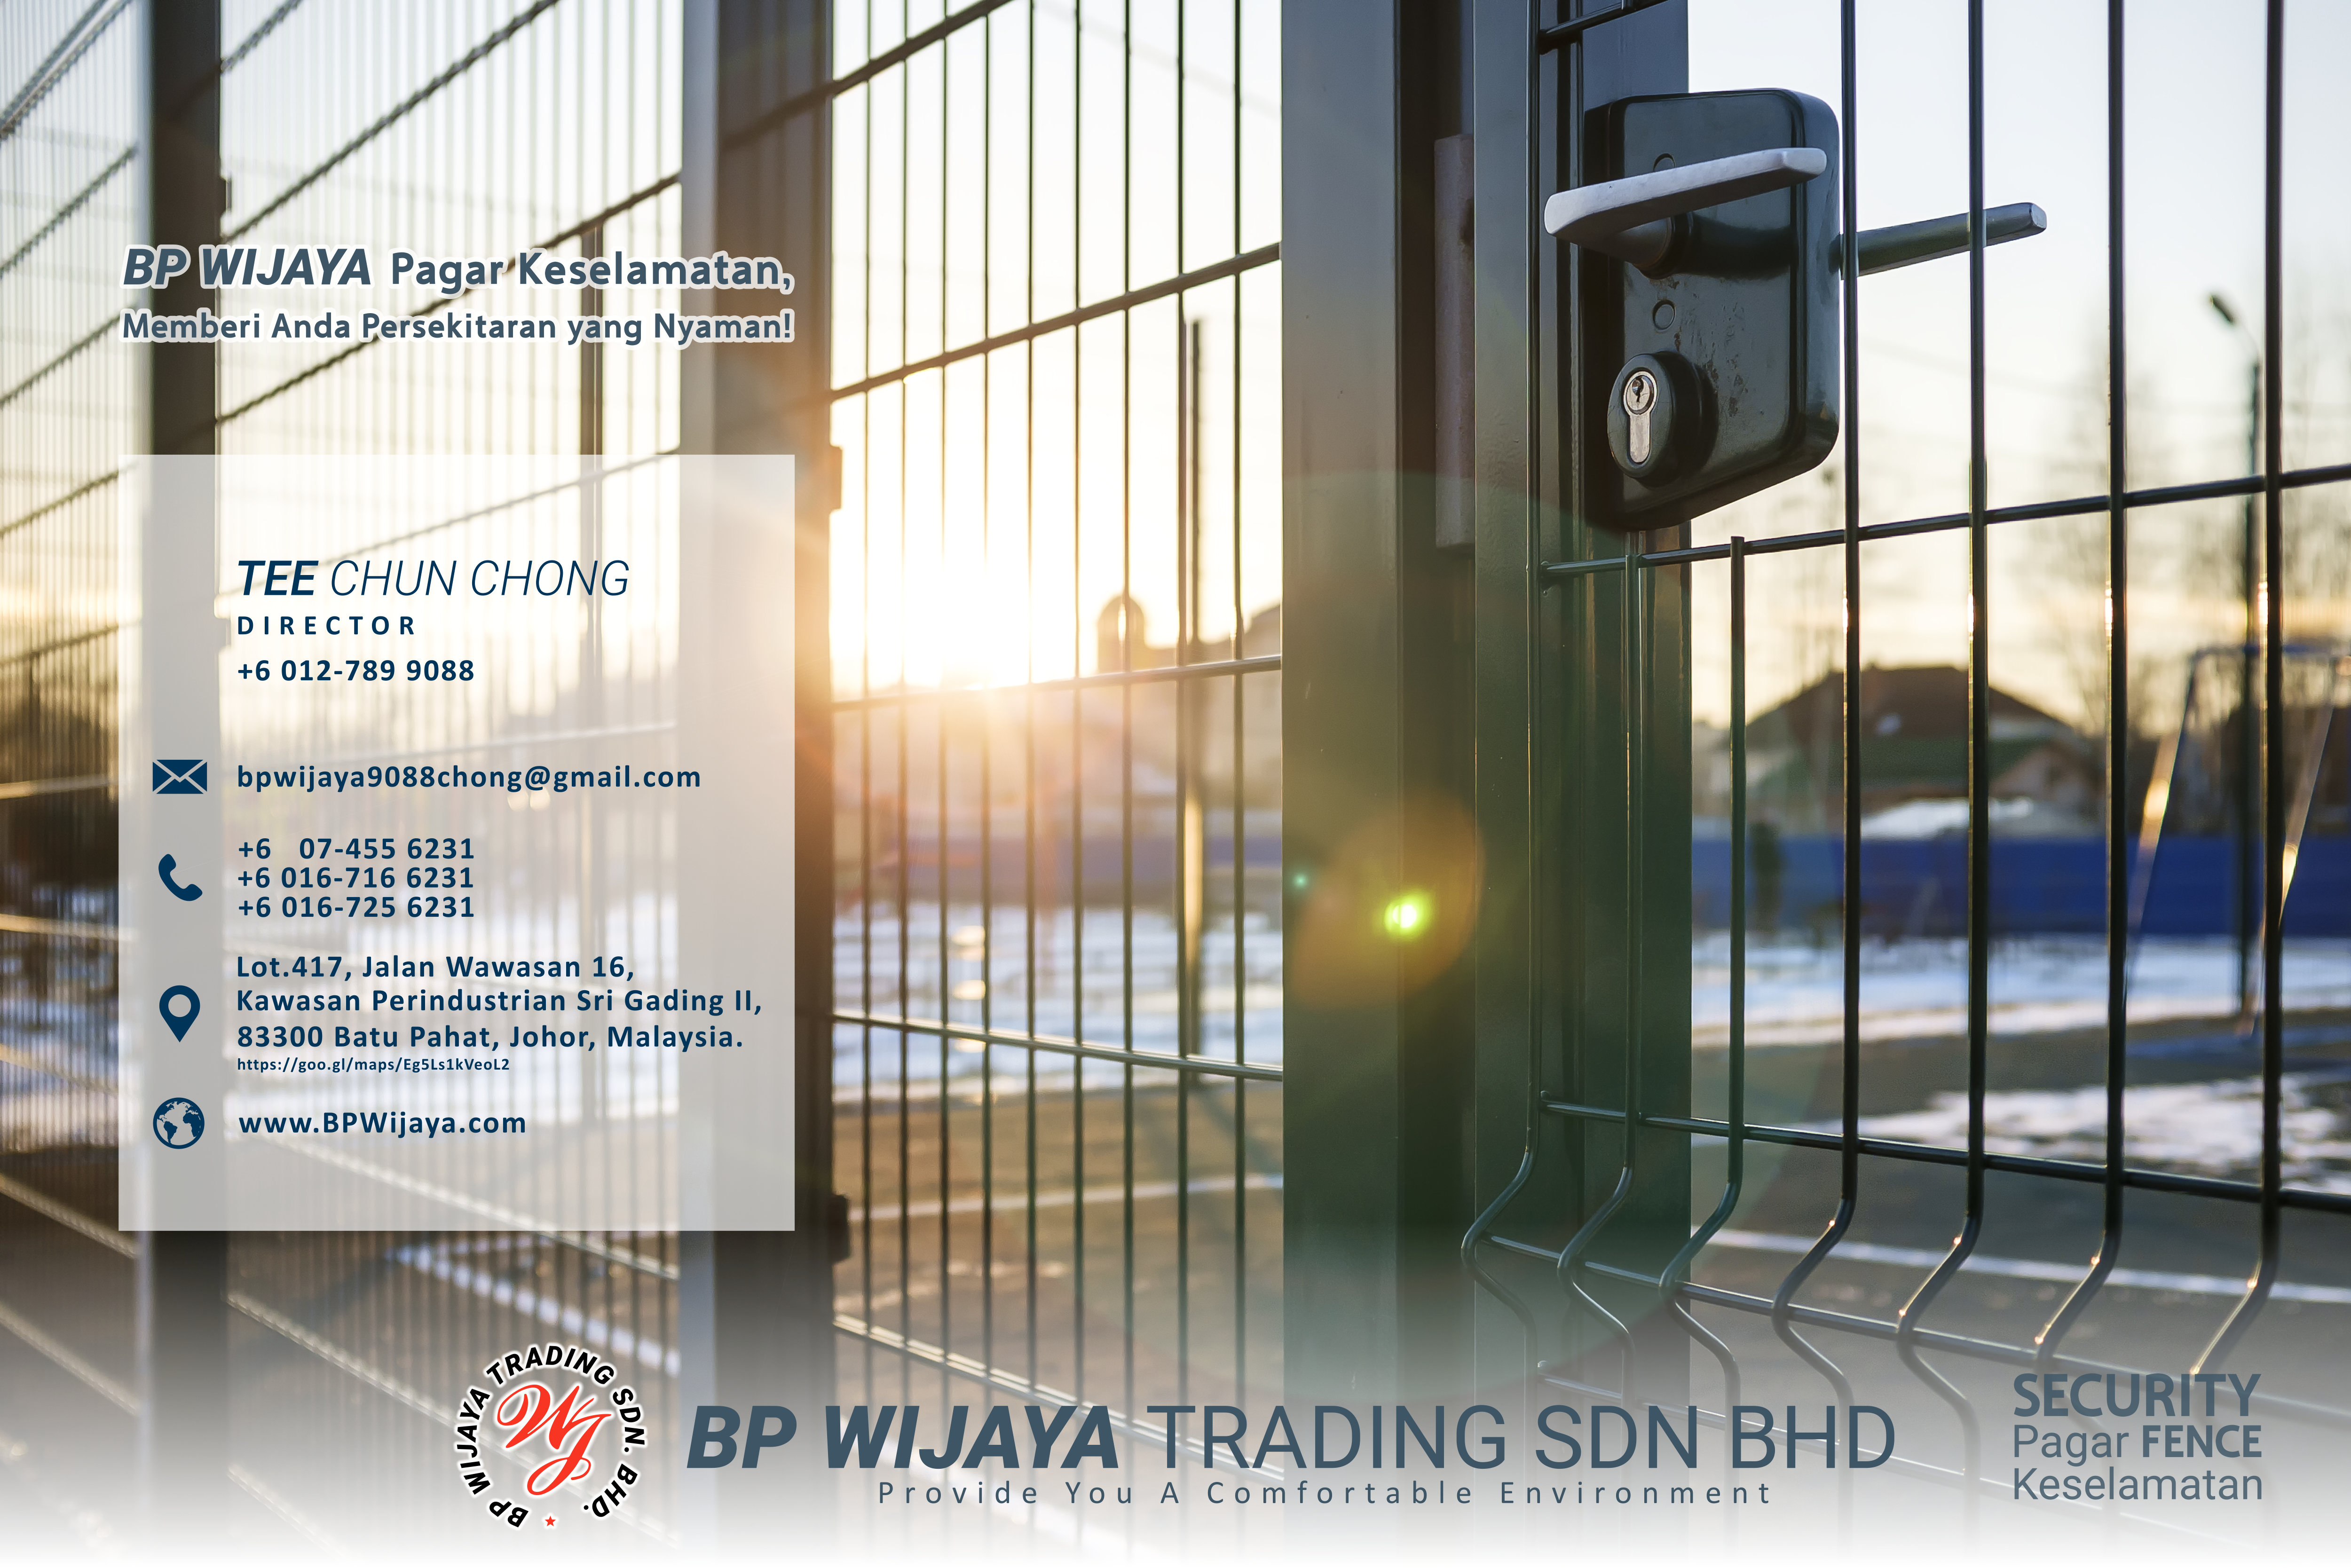 BP Wijaya Trading Sdn Bhd Fence Malaysia Selangor Kuala Lumpur manufacturer of safety fences building materials for housing construction site Security fencing factory fence house fence A01-004